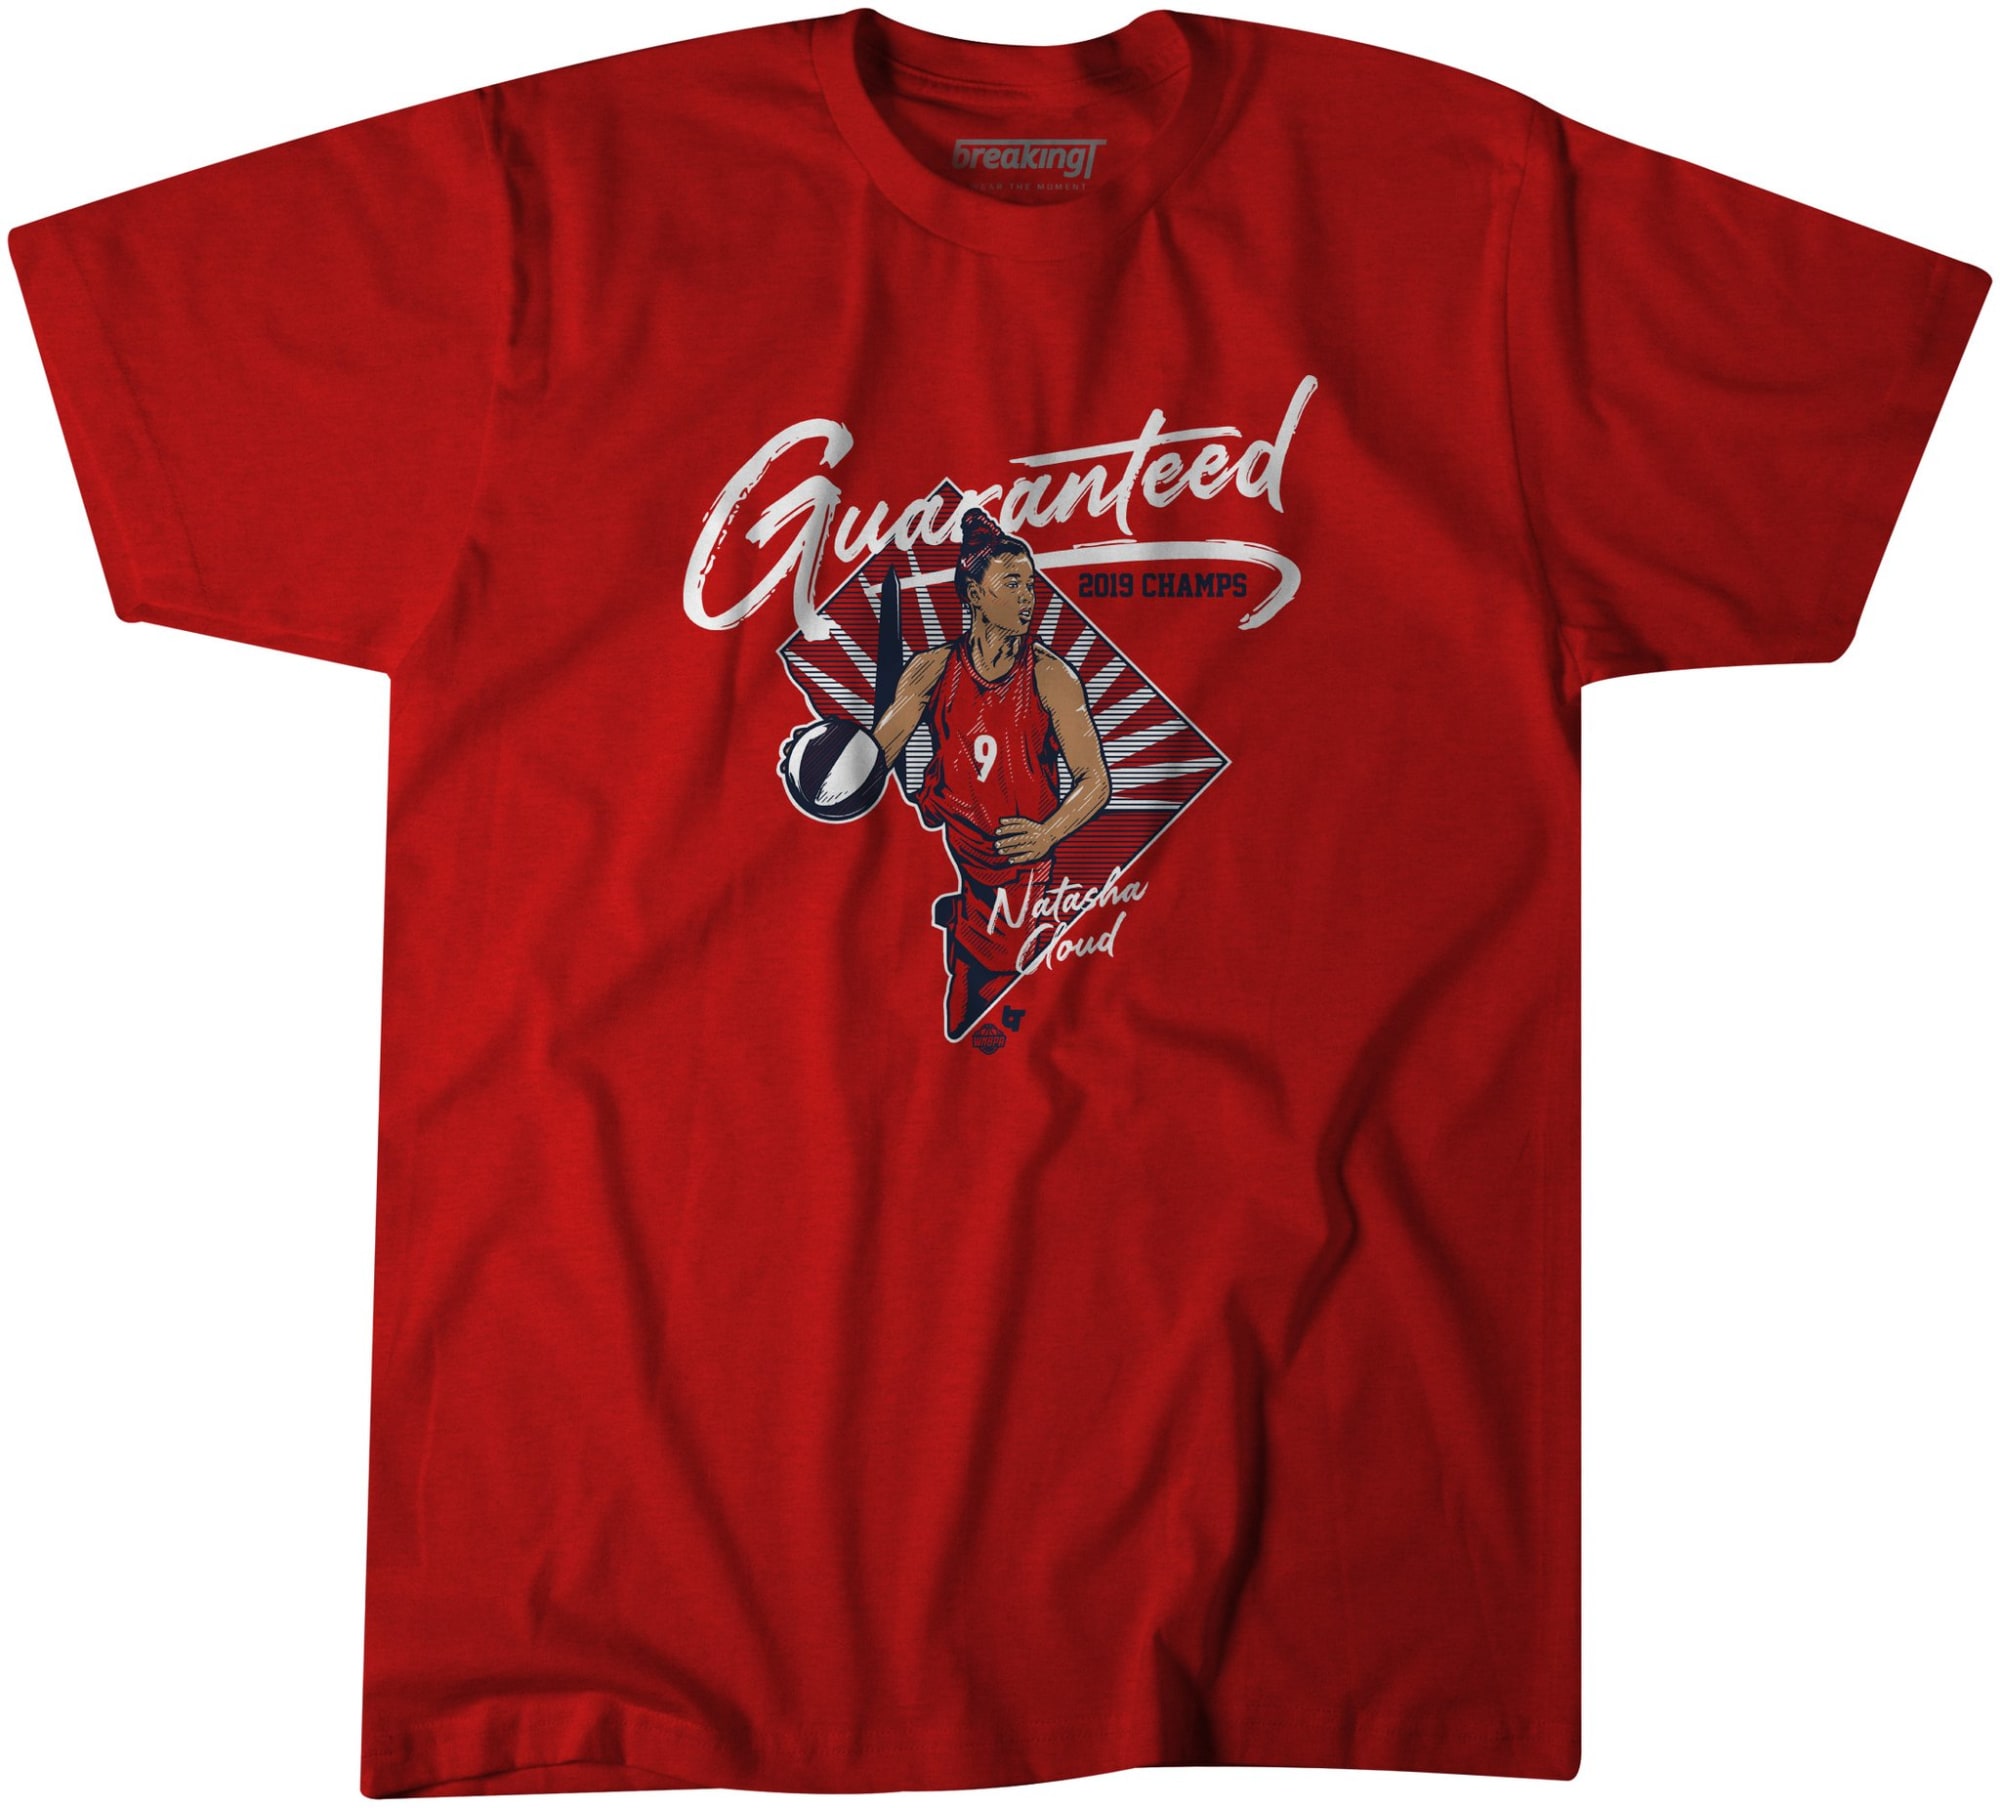 For The A: You need this new Atlanta Braves shirt from BreakingT